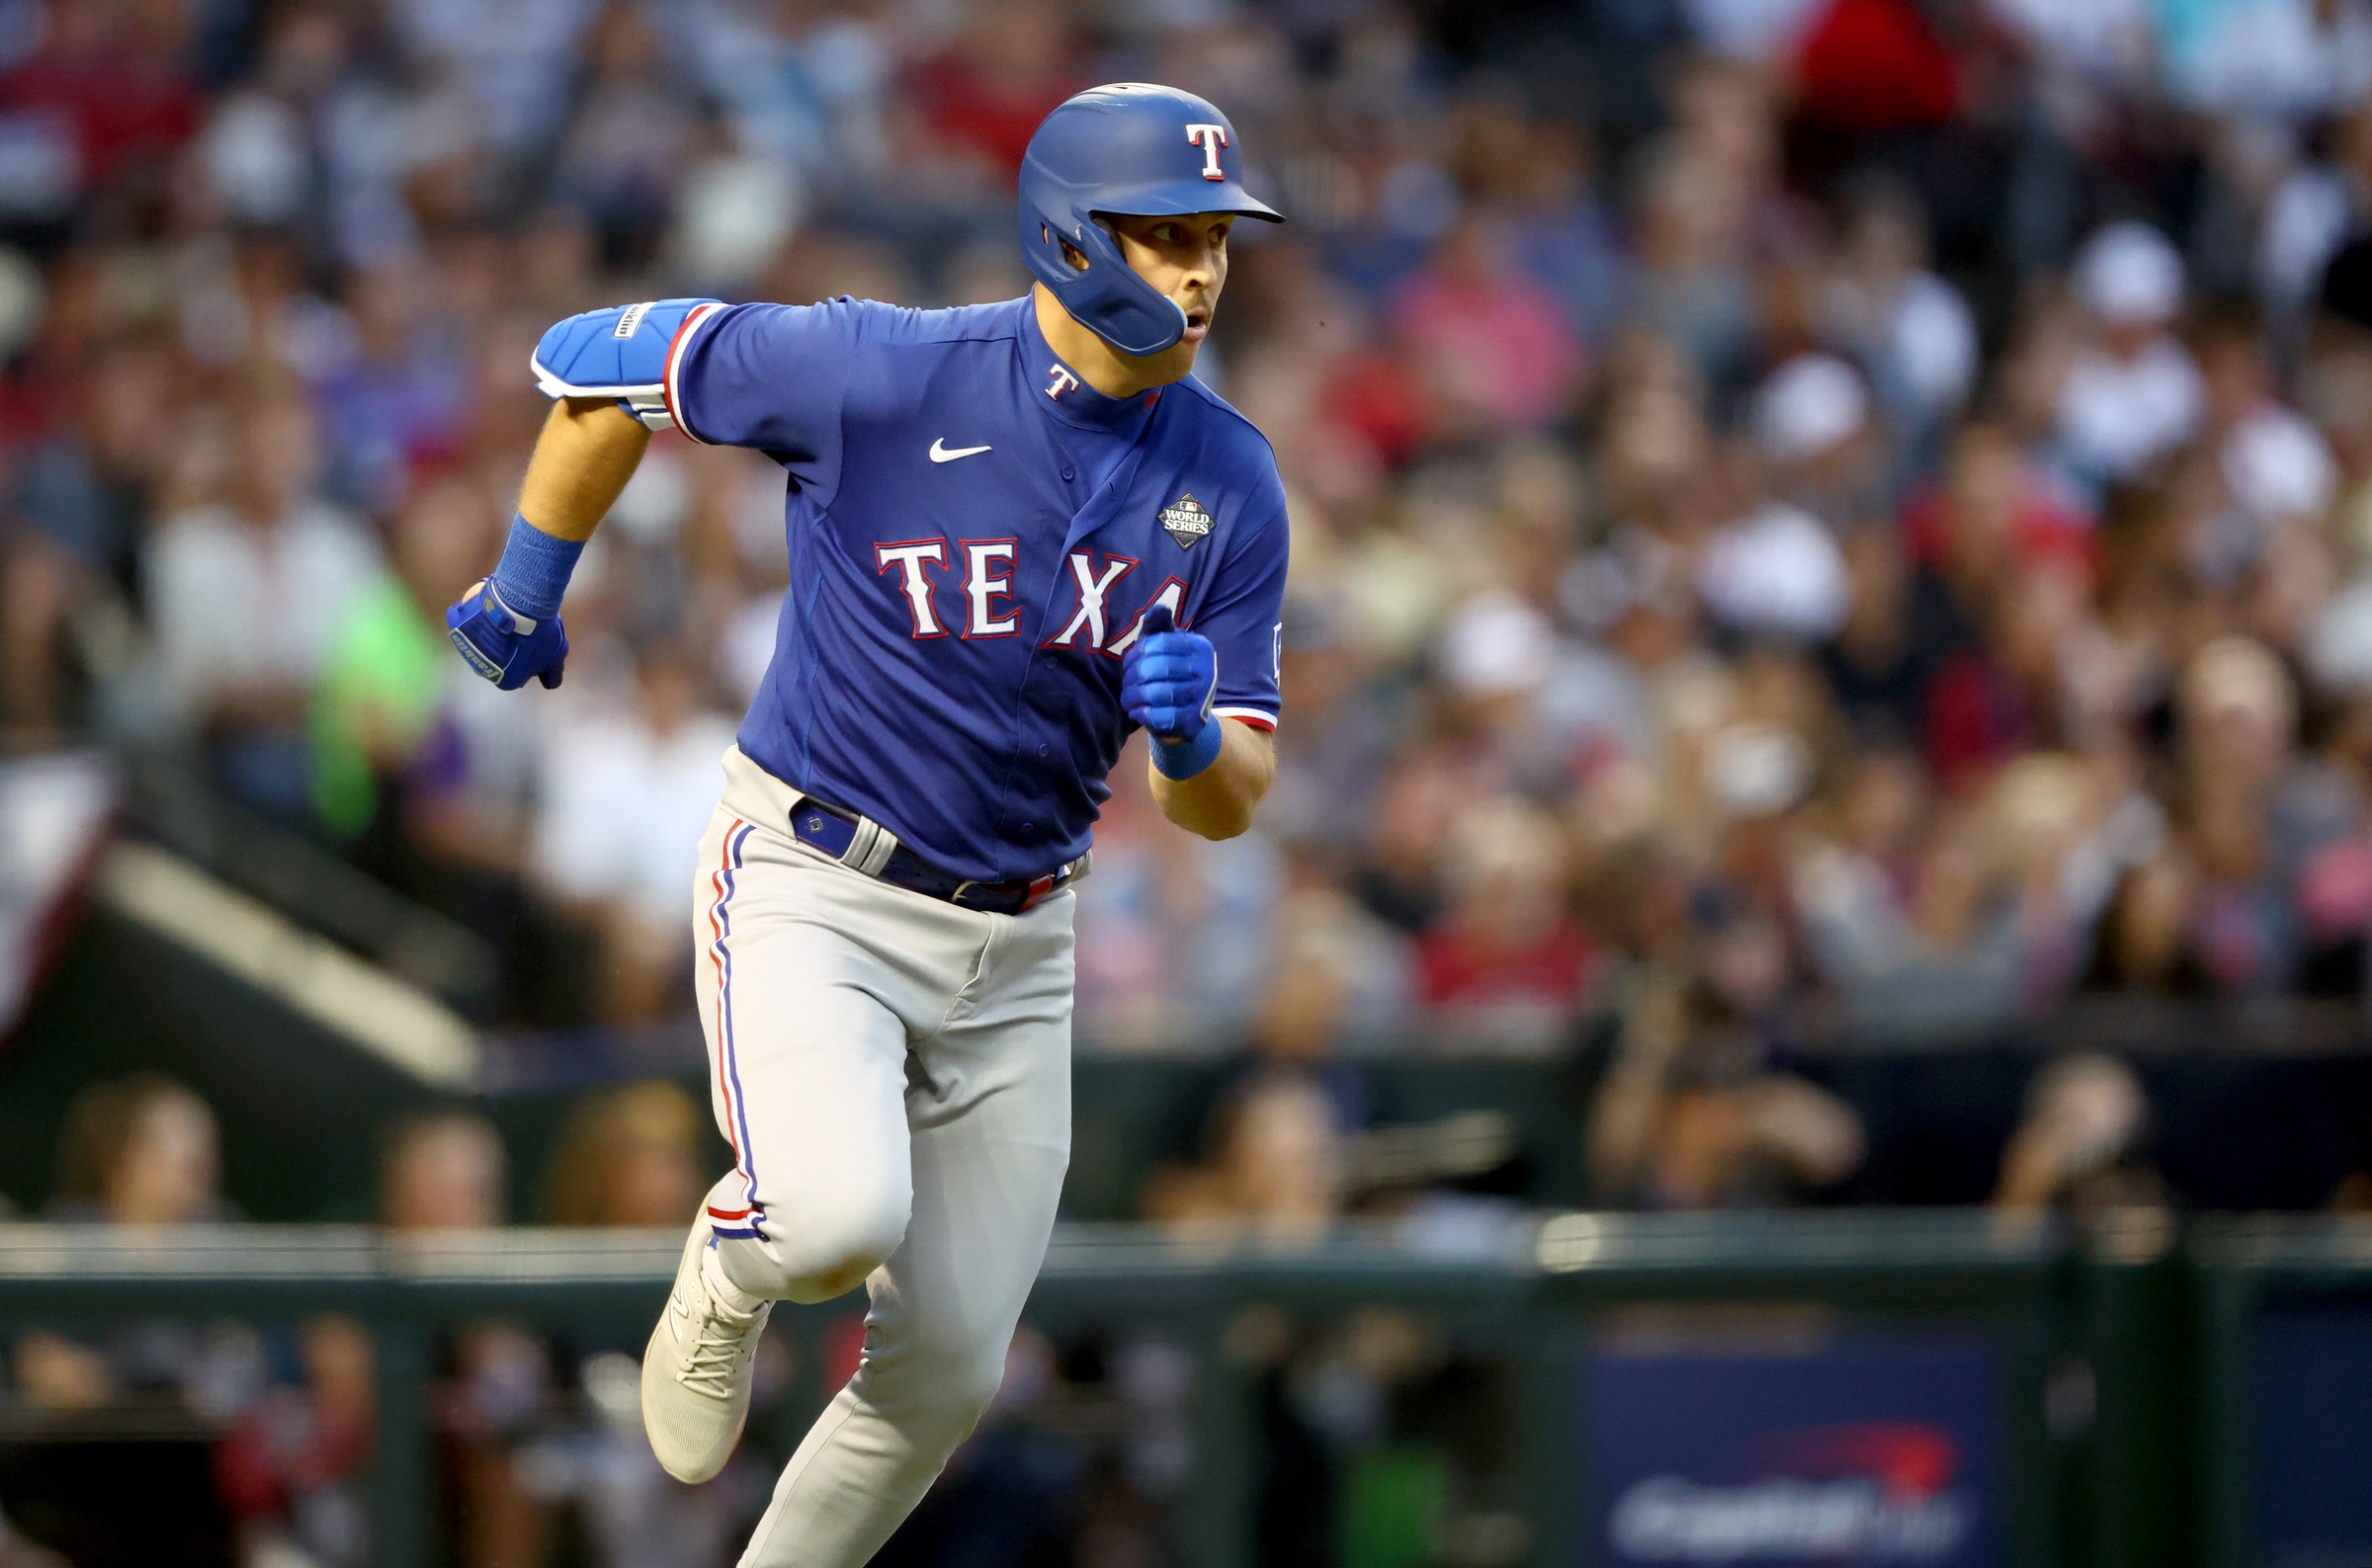 Rangers' Nathaniel Lowe Could Miss Opening Day